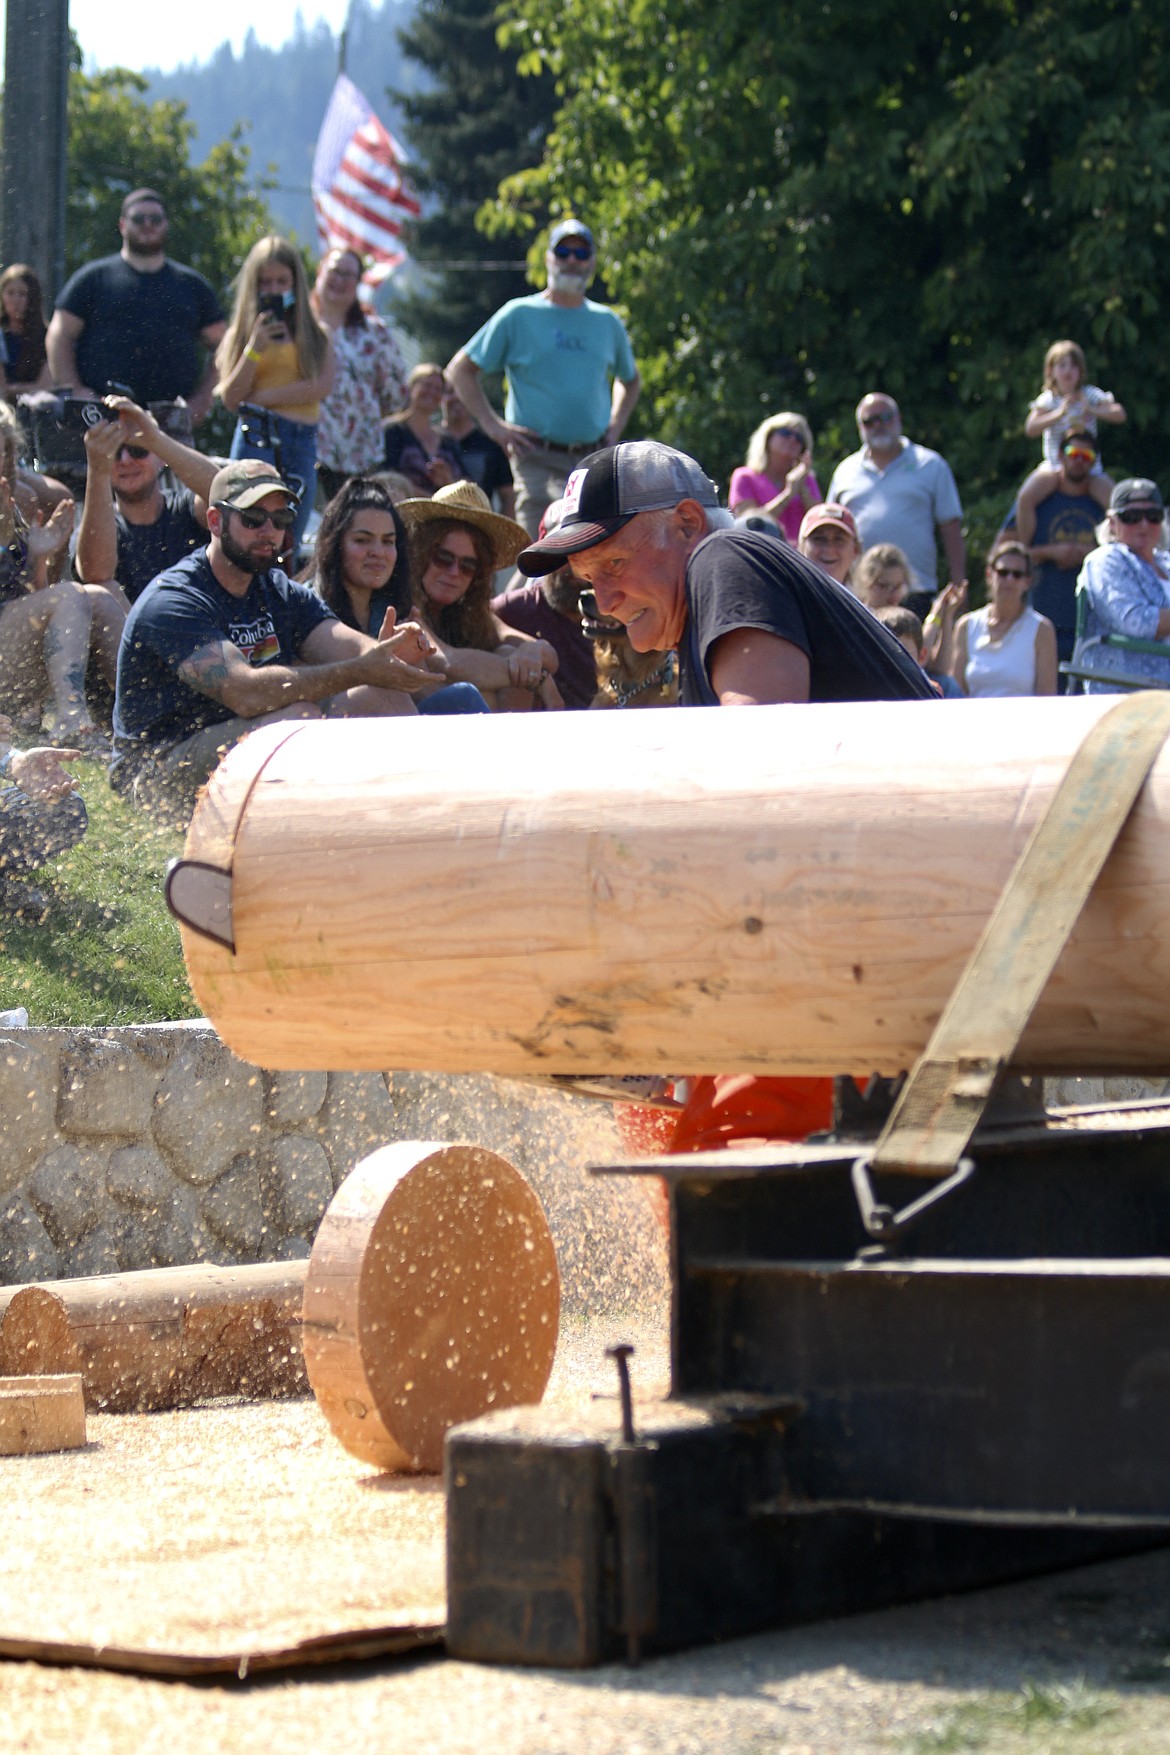 Earl Holdersen of Holdersen Logging, the oldest competitor, won the the men's power saw contest with a time of 19.2 seconds, five seconds faster than the second place participant, at the Paul Bunyan Days logging competition at St. Maries City Park on Sunday. HANNAH NEFF/Press